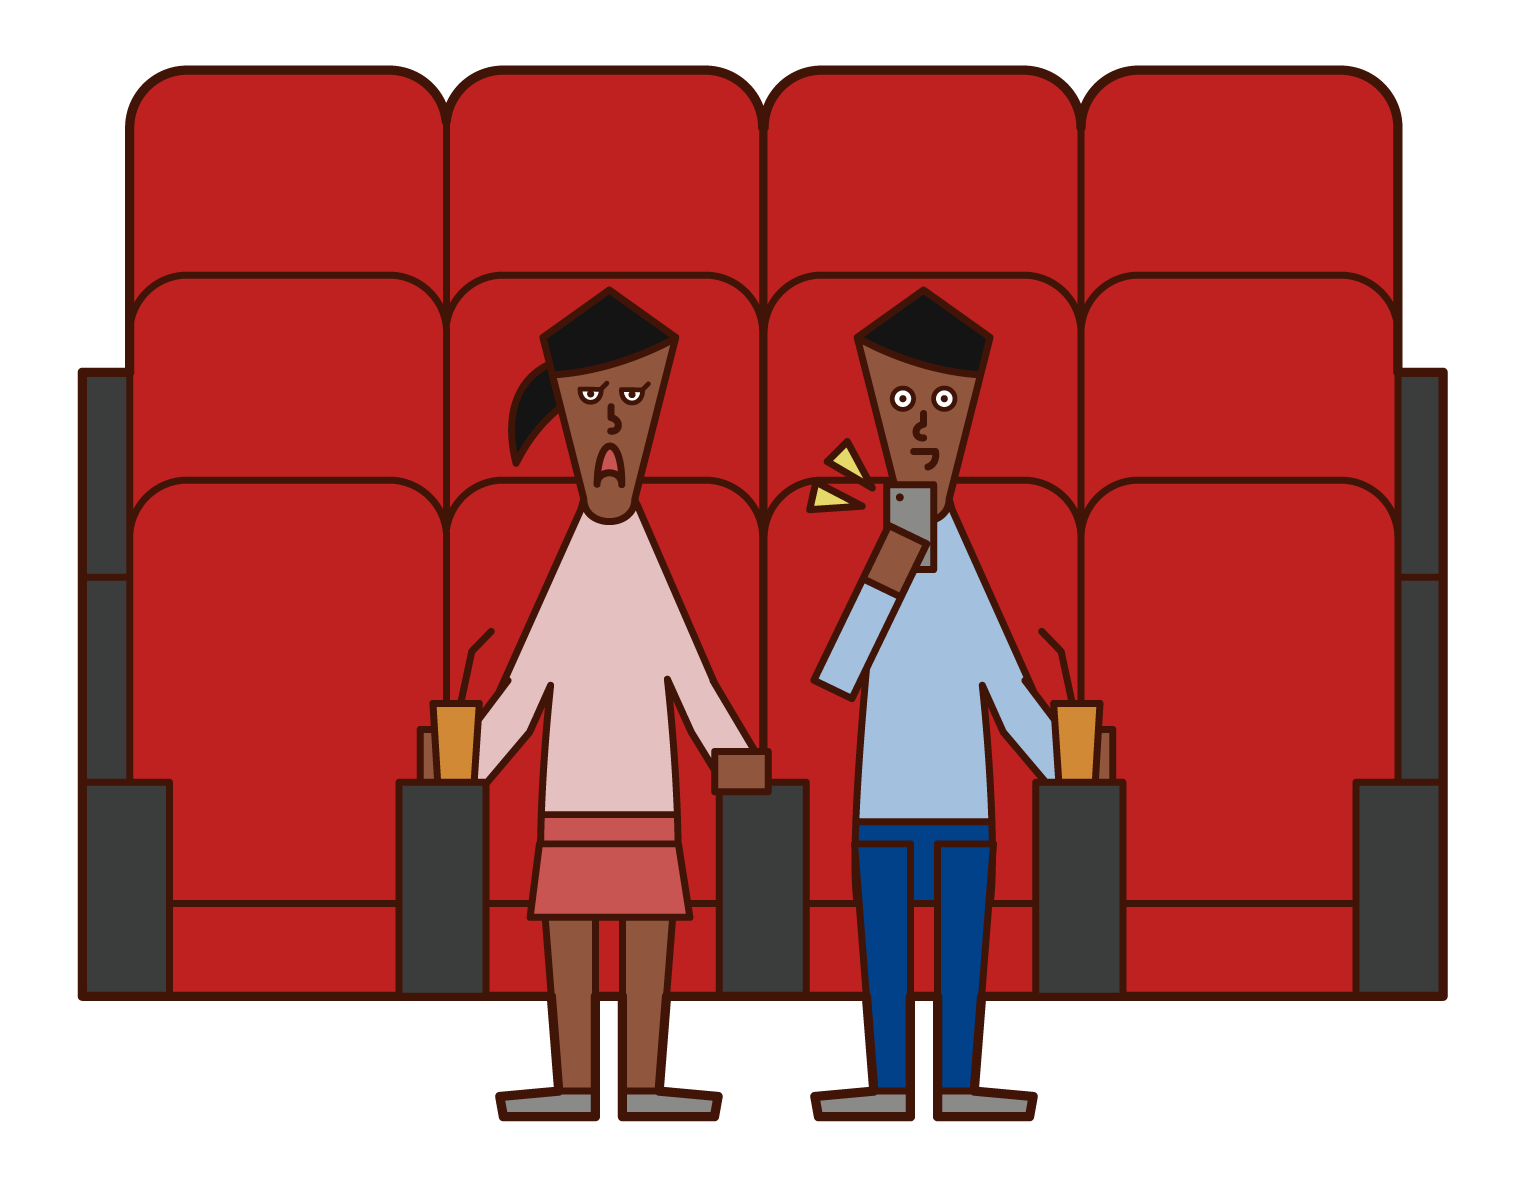 Illustration of a man using a smartphone in a movie theater